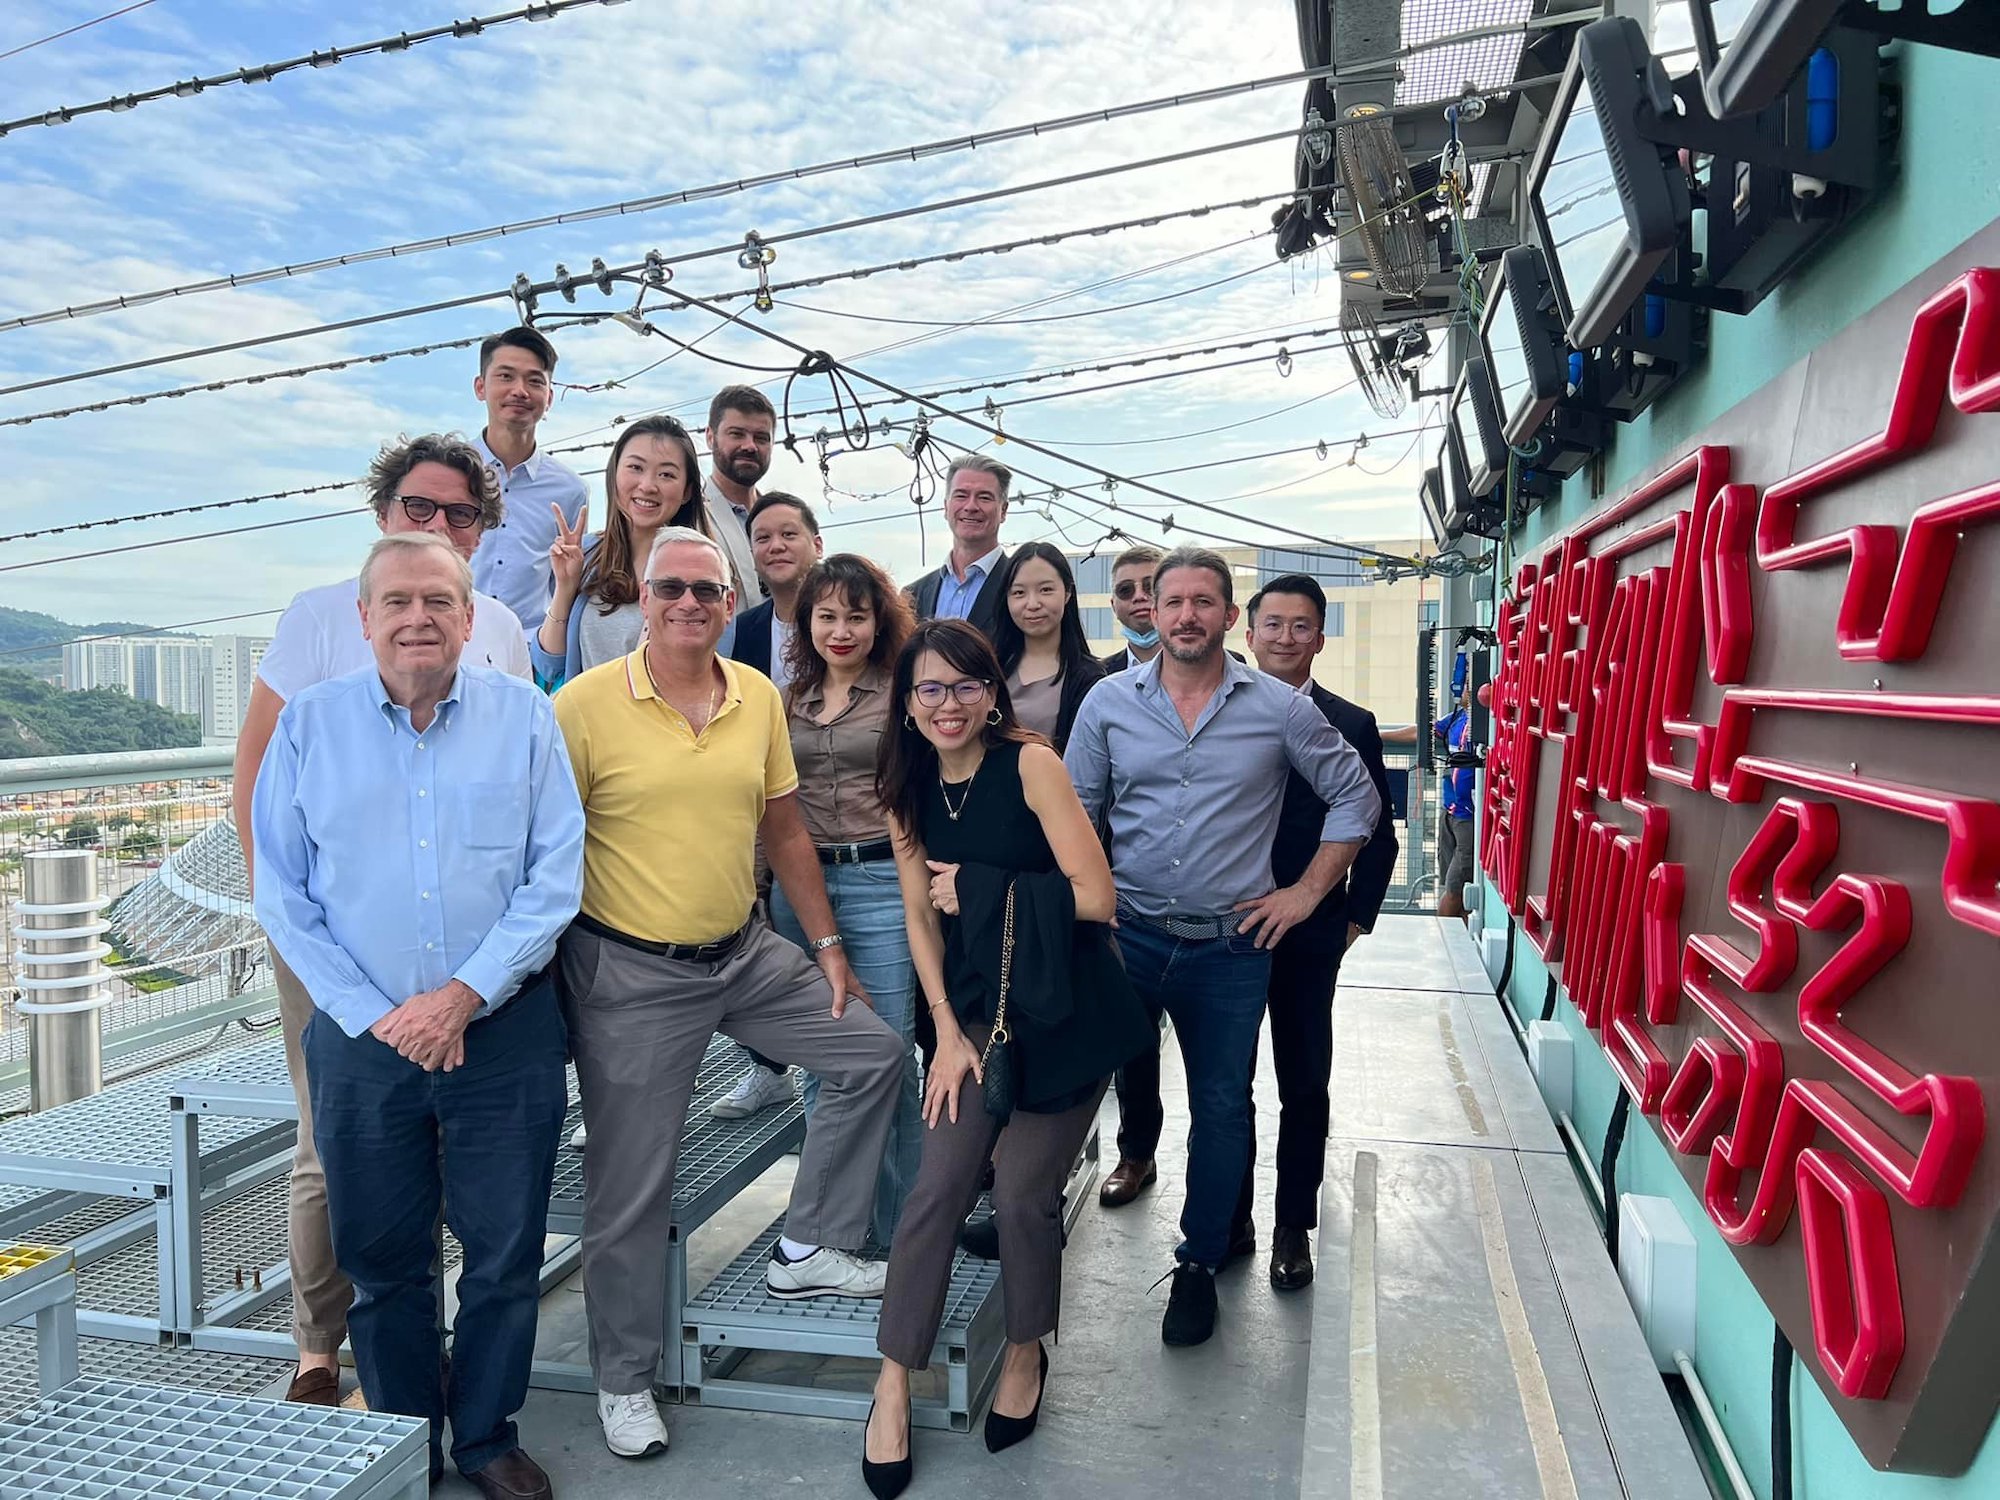 BritCham members enjoyed a site visit to the world’s first immersive zipline attraction, ZIPCITY Macau